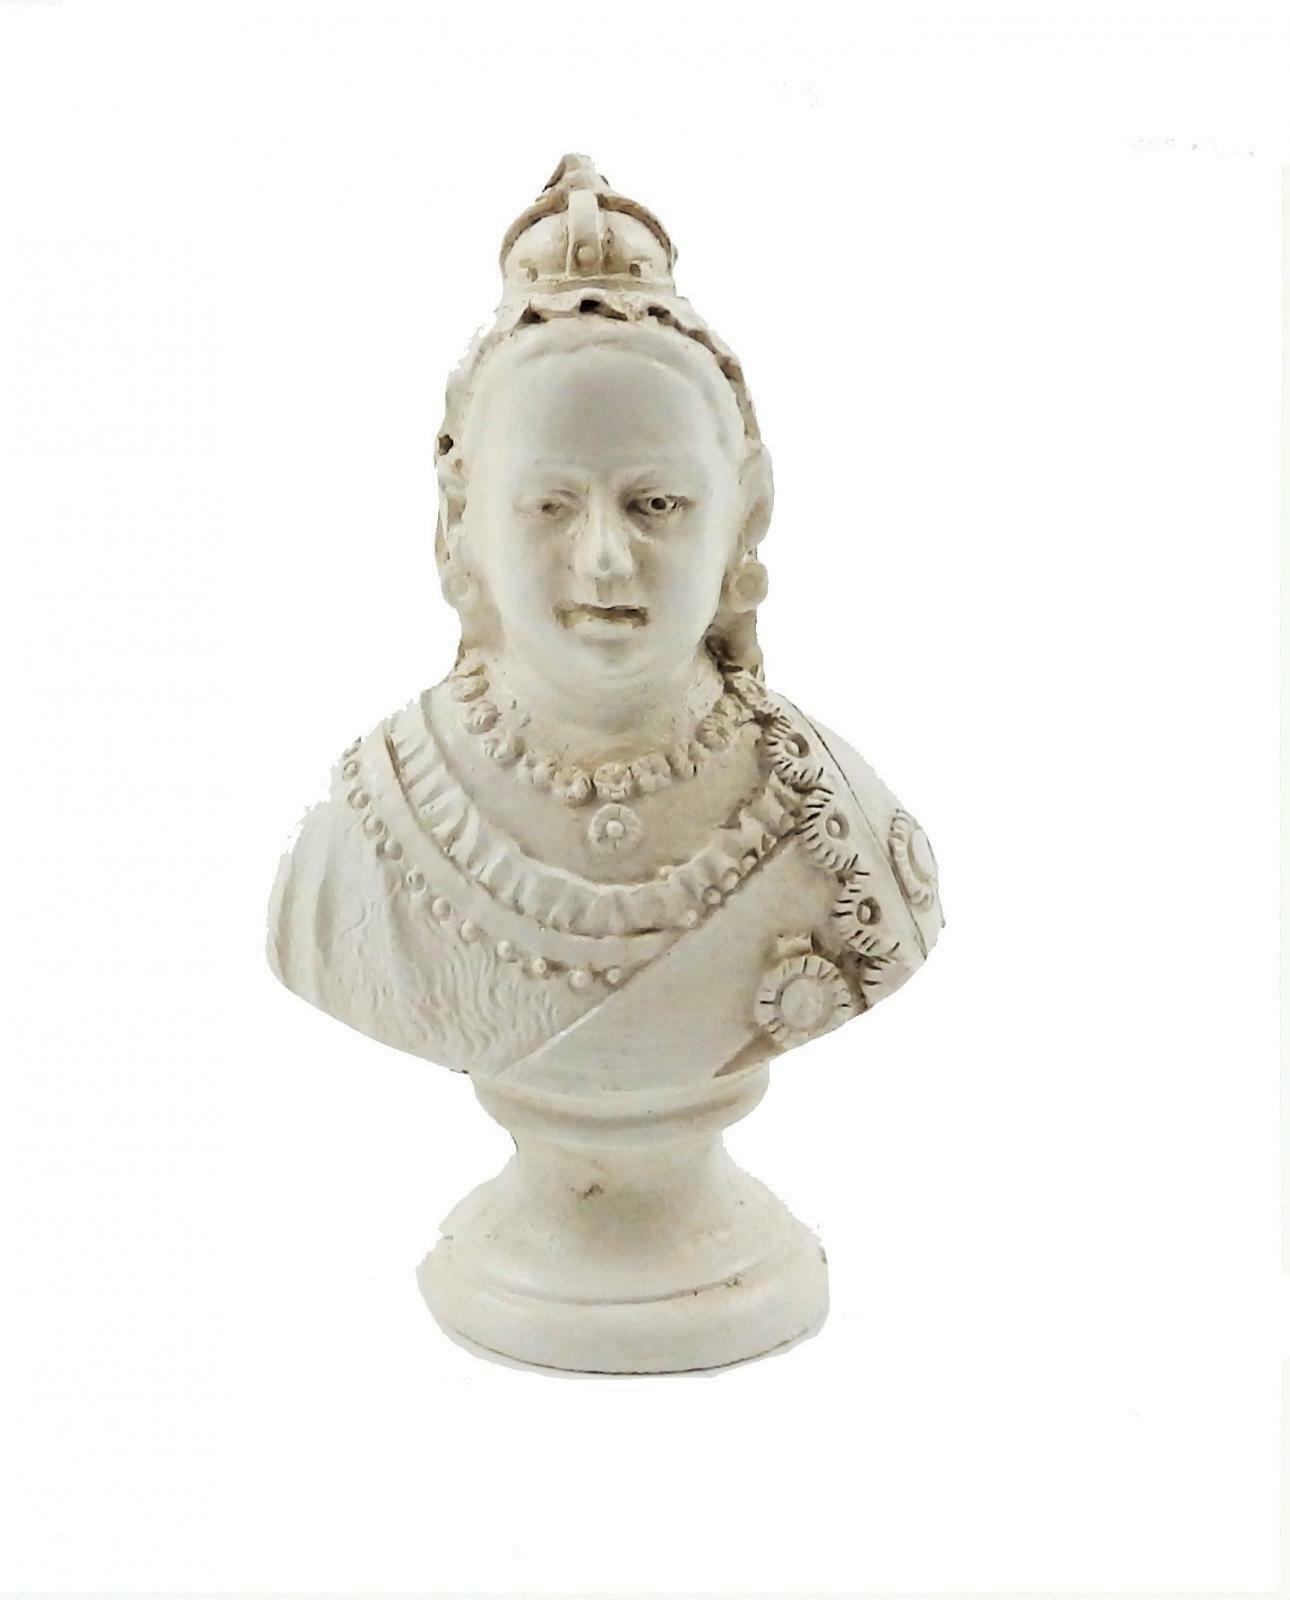 Melody Jane Dolls House Queen Victoria Bust Miniature Ornament 1:12 Accessory